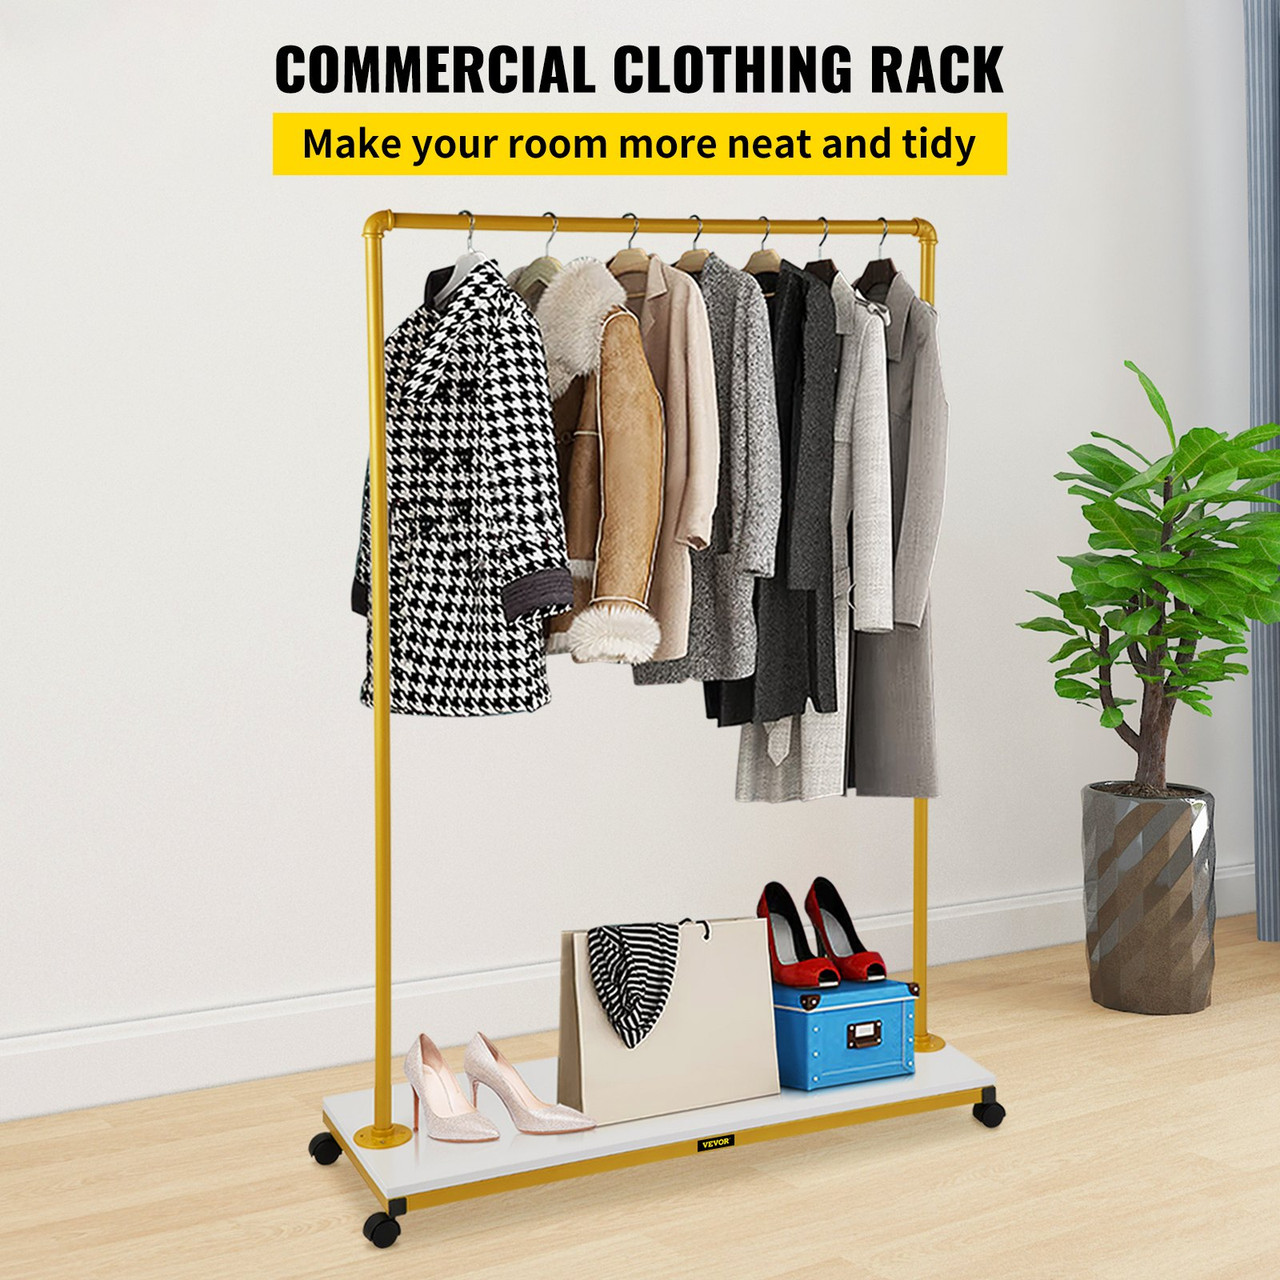 Clothing Garment Rack, 39.4"x14.2"x59.1", Heavy-Duty Clothes Rack w/Bottom Shelf, 4 Swivel Casters, Sturdy Steel Frame, Rolling Clothes Organizer for Laundry Room Retail Store Boutique, Gold